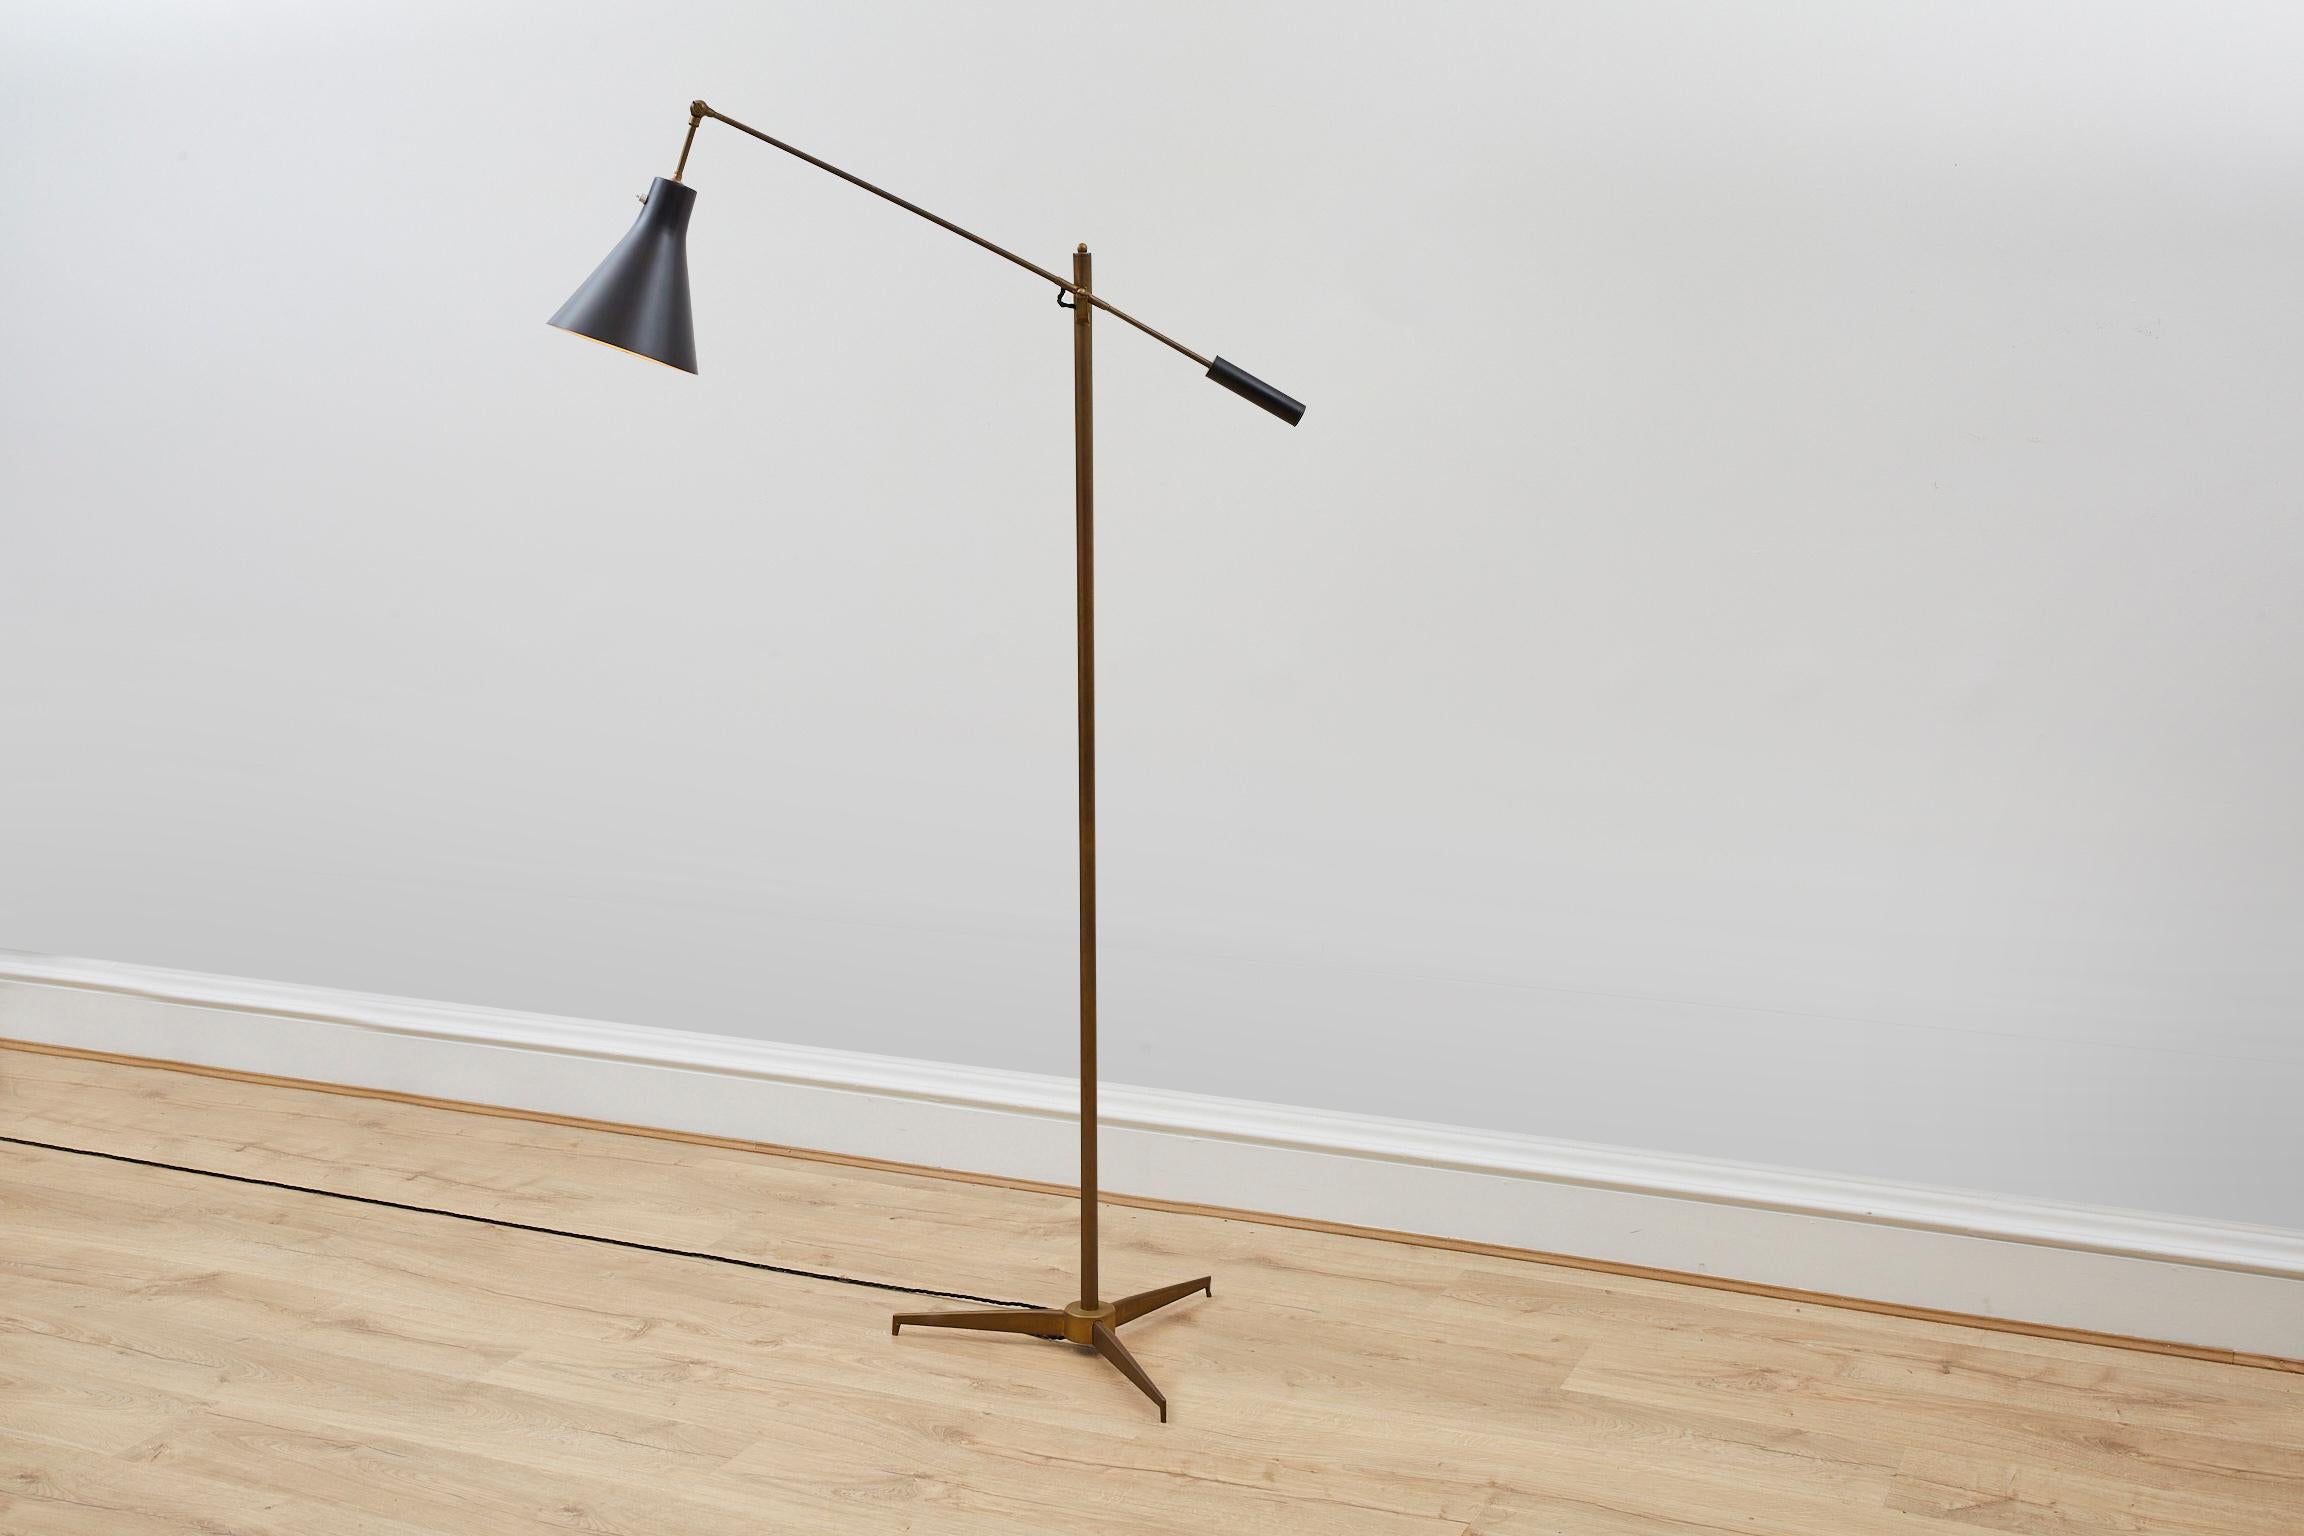 A super stylish Italian 1950's Floor Lamp by Arredoluce Monza. 

The Lamp features a slim brass pole set on a tri - legged brass base with black enamelled classic cone shaped shade.

The arm that holds the shade can be adjusted to change